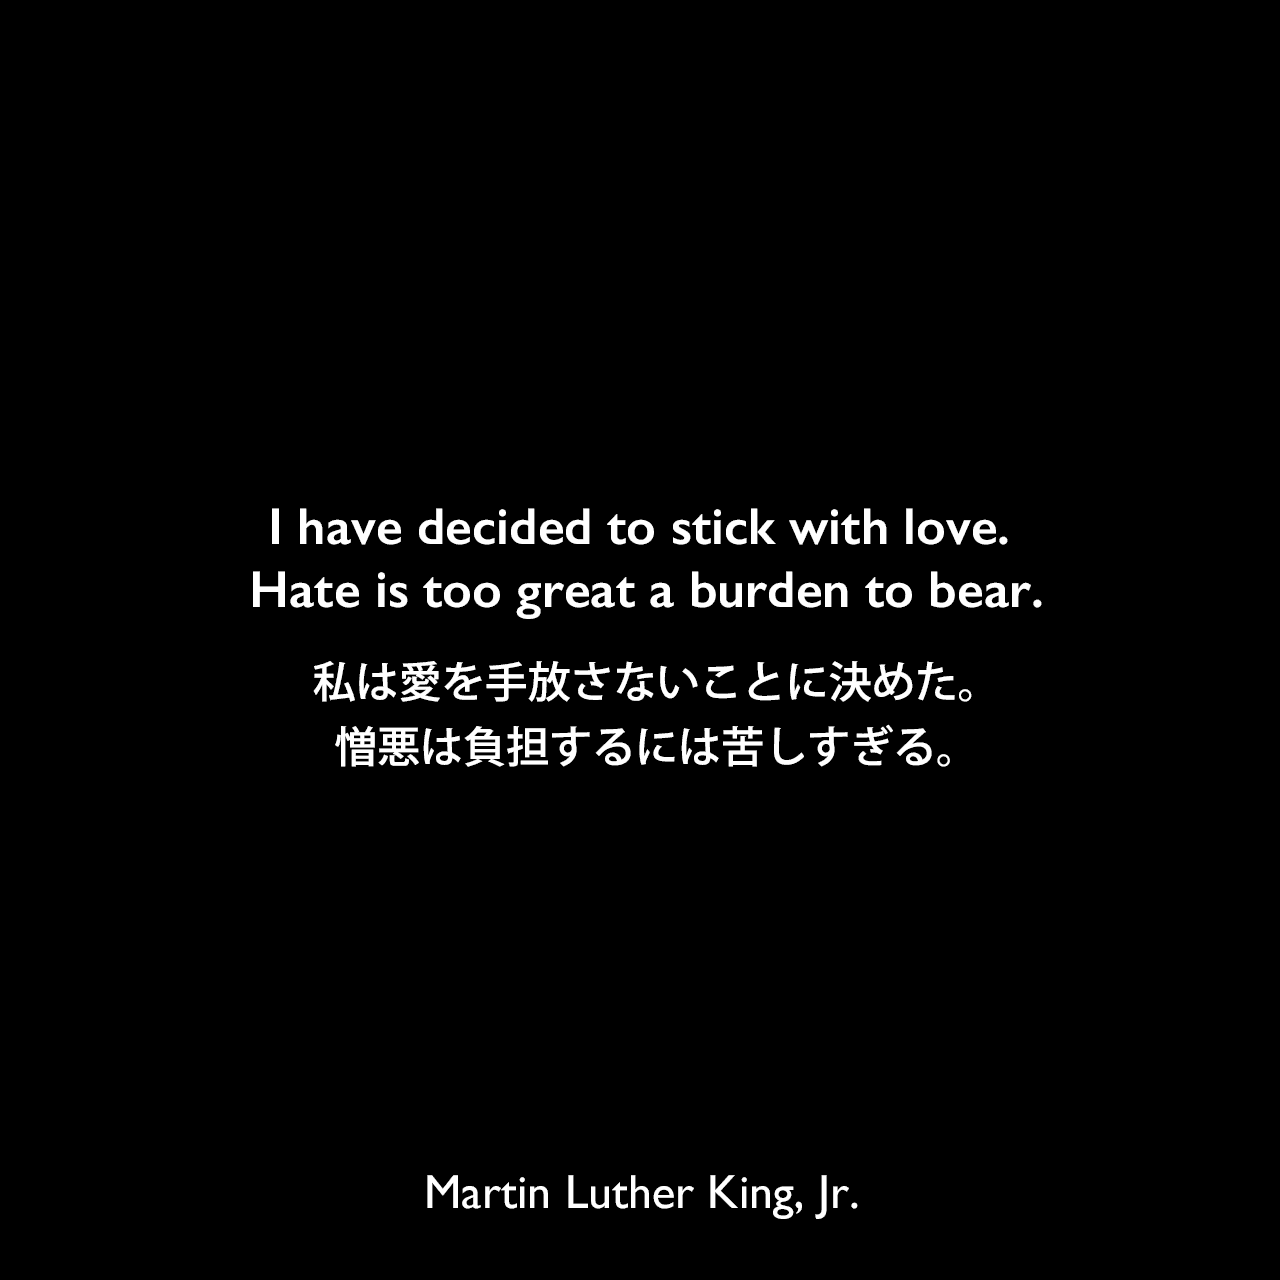 I have decided to stick with love. Hate is too great a burden to bear.私は愛を手放さないことに決めた。憎悪は負担するには苦しすぎる。- 1965年の説教「The American Dream 」よりMartin Luther King, Jr.